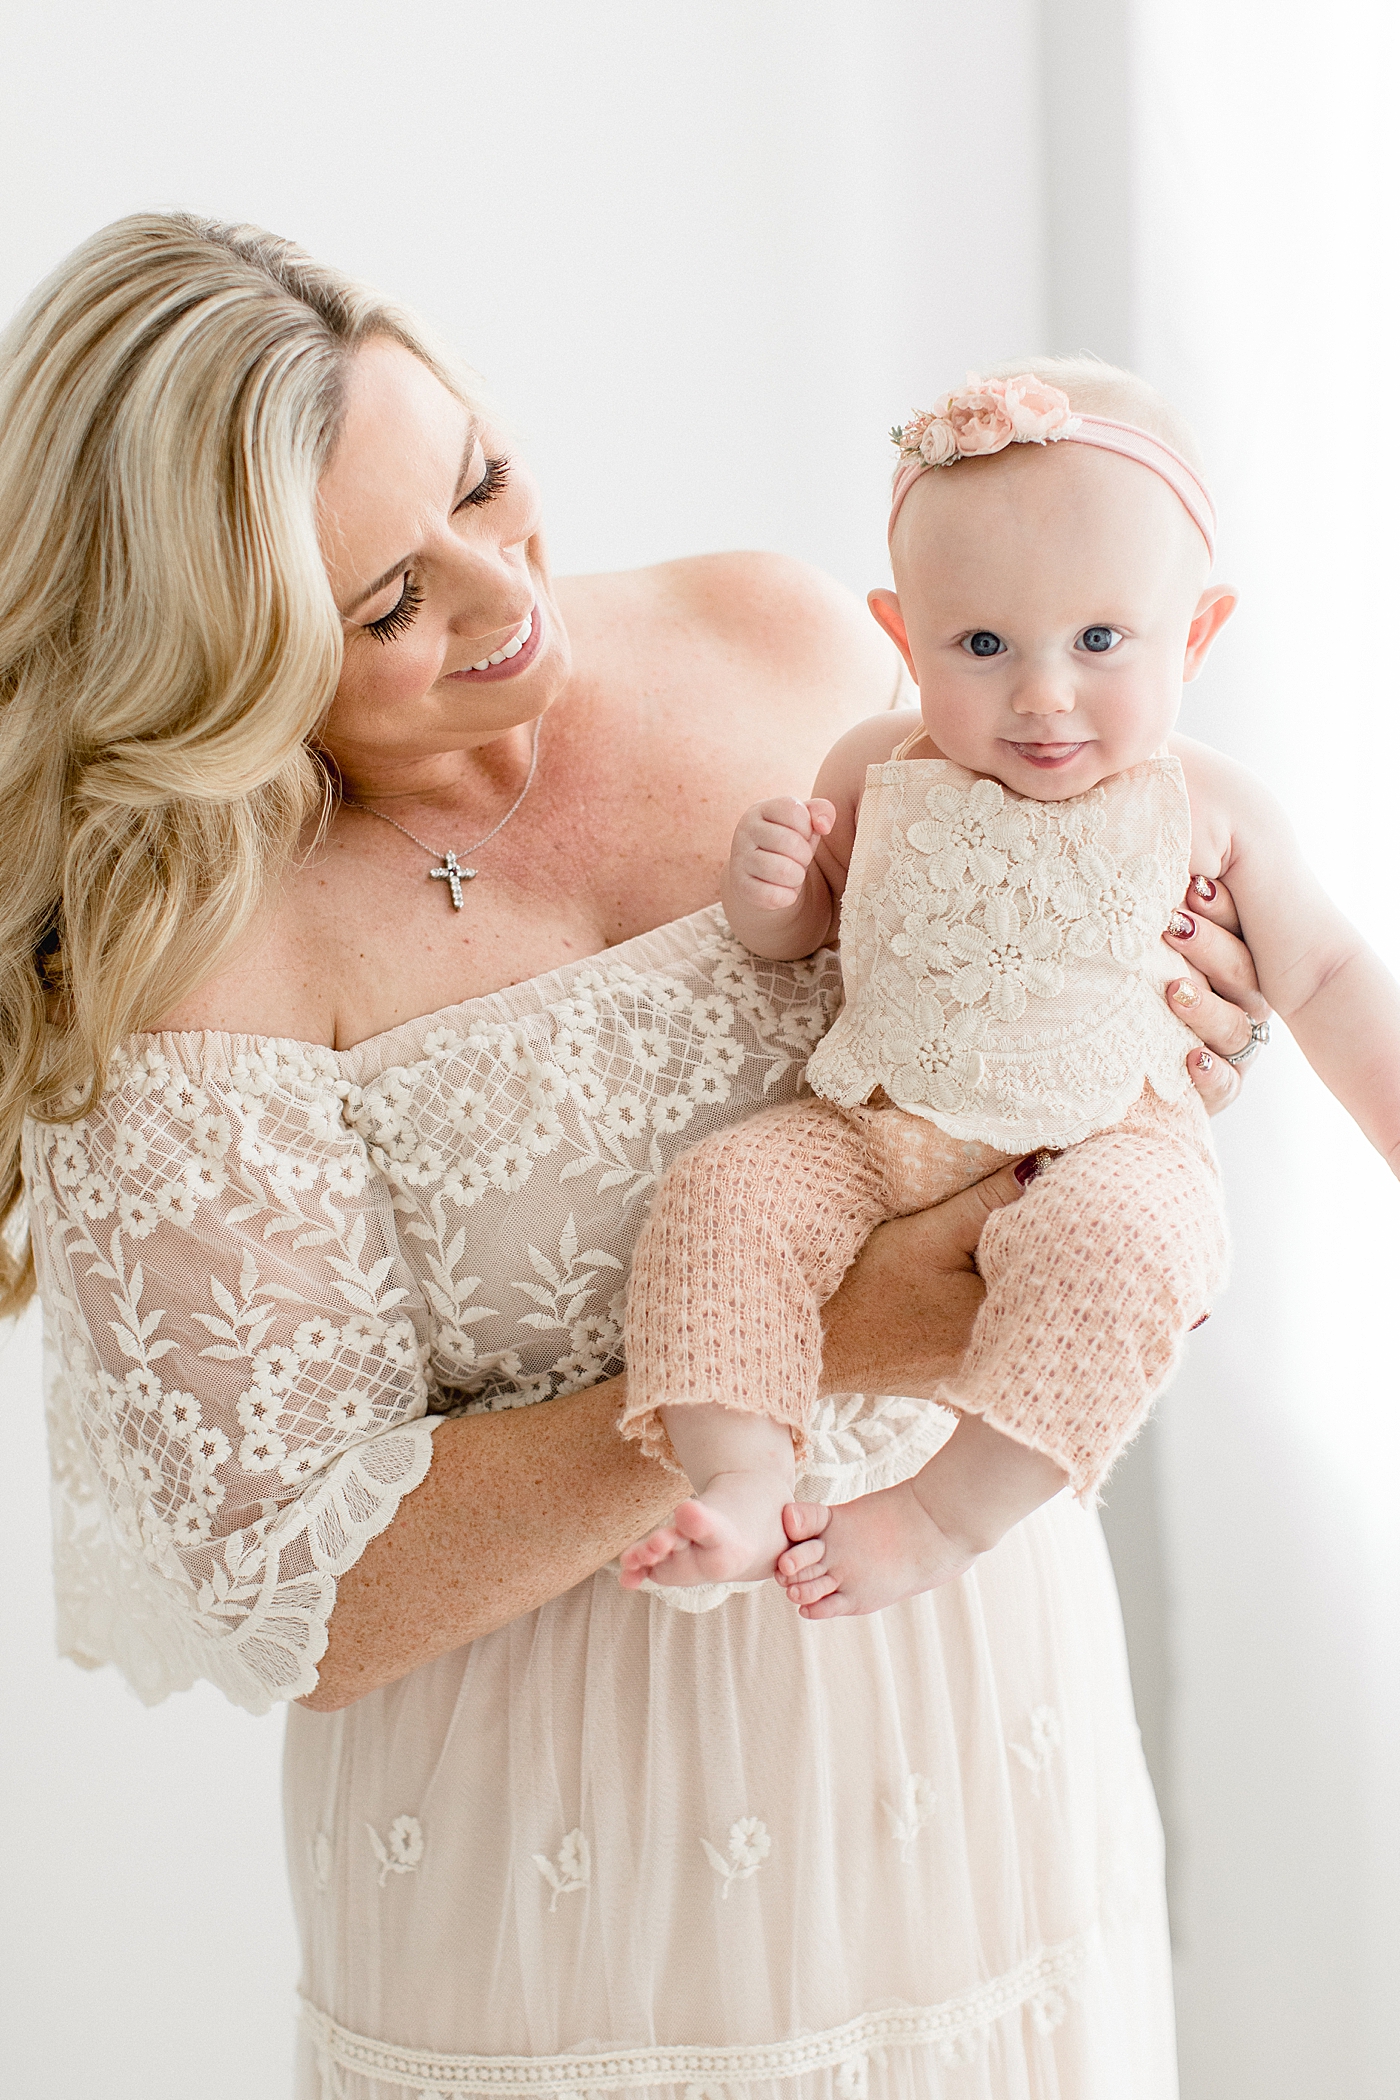 LPGA Pro Golfer, Brittany Lincicome, holding her baby girl. Photo by Brittany Elise Photography.